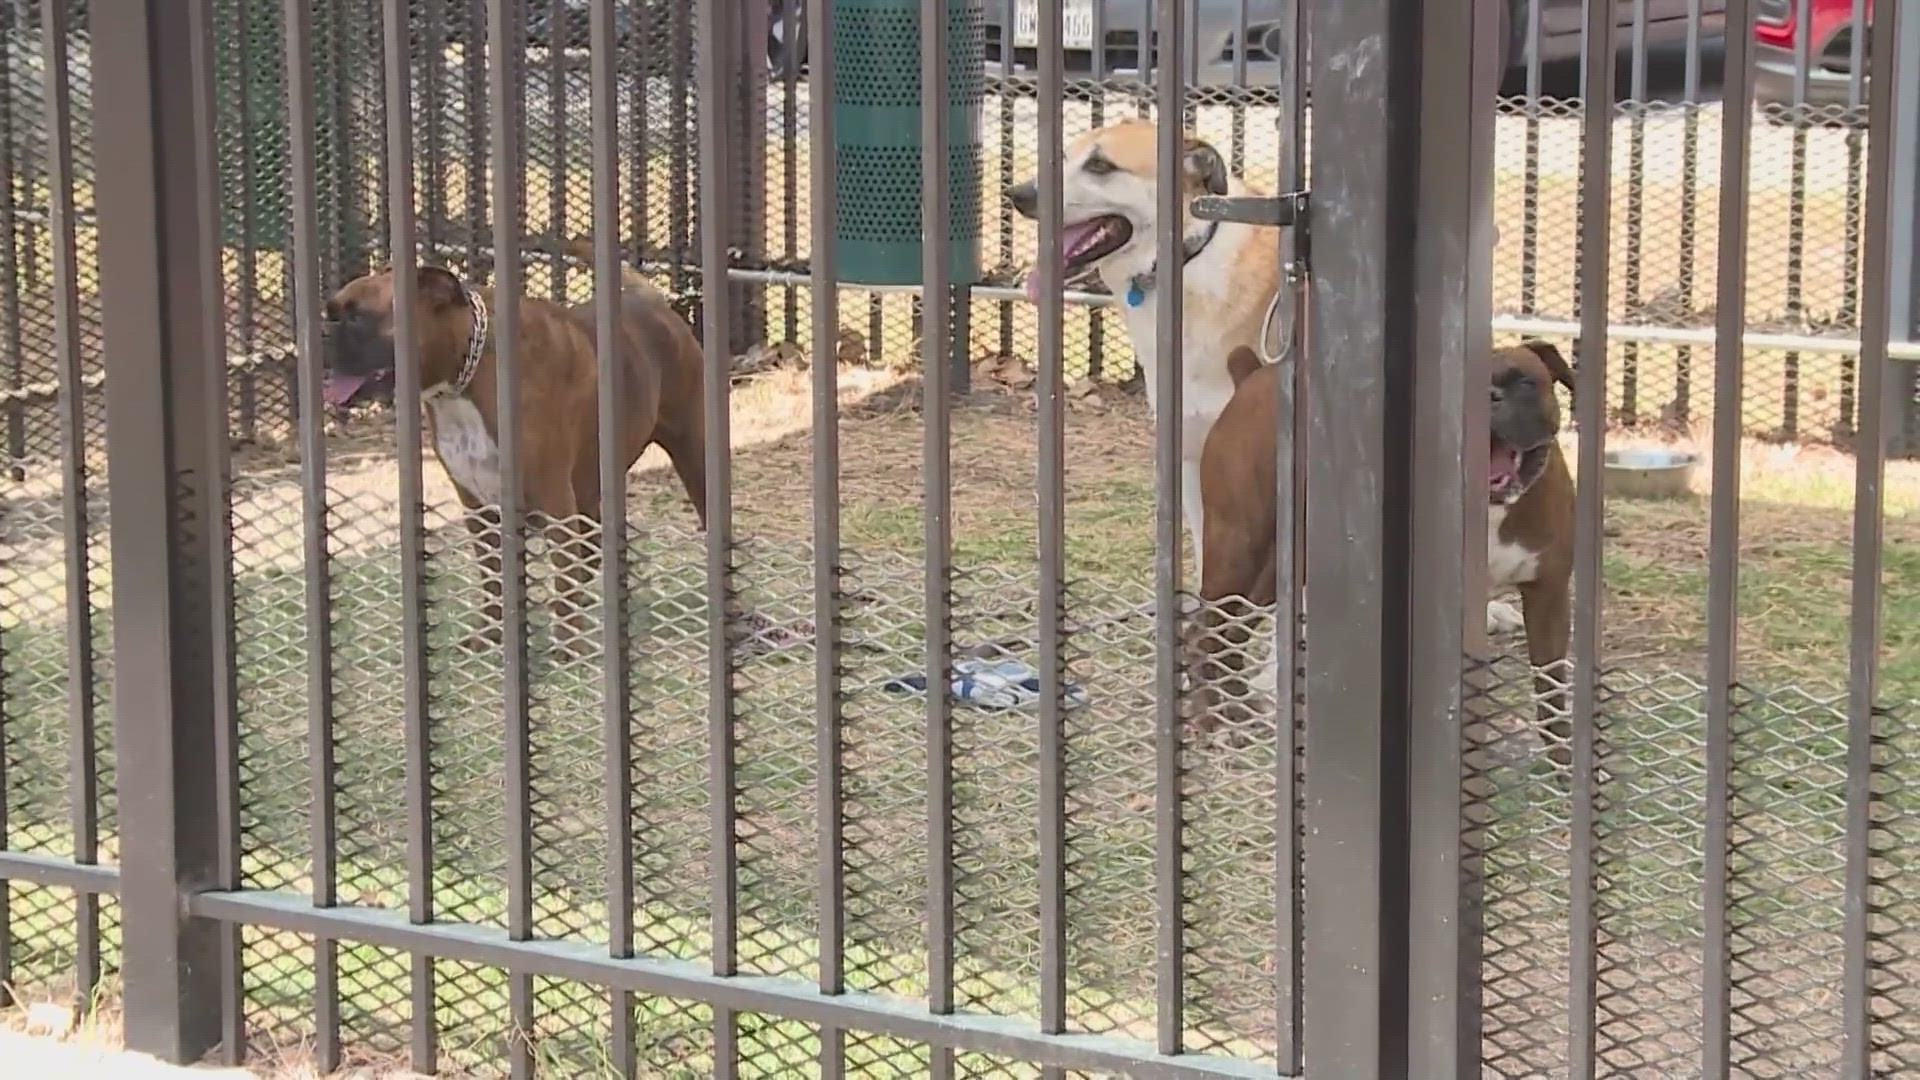 The two dogs were on "foster holds" when they were killed by ACS.